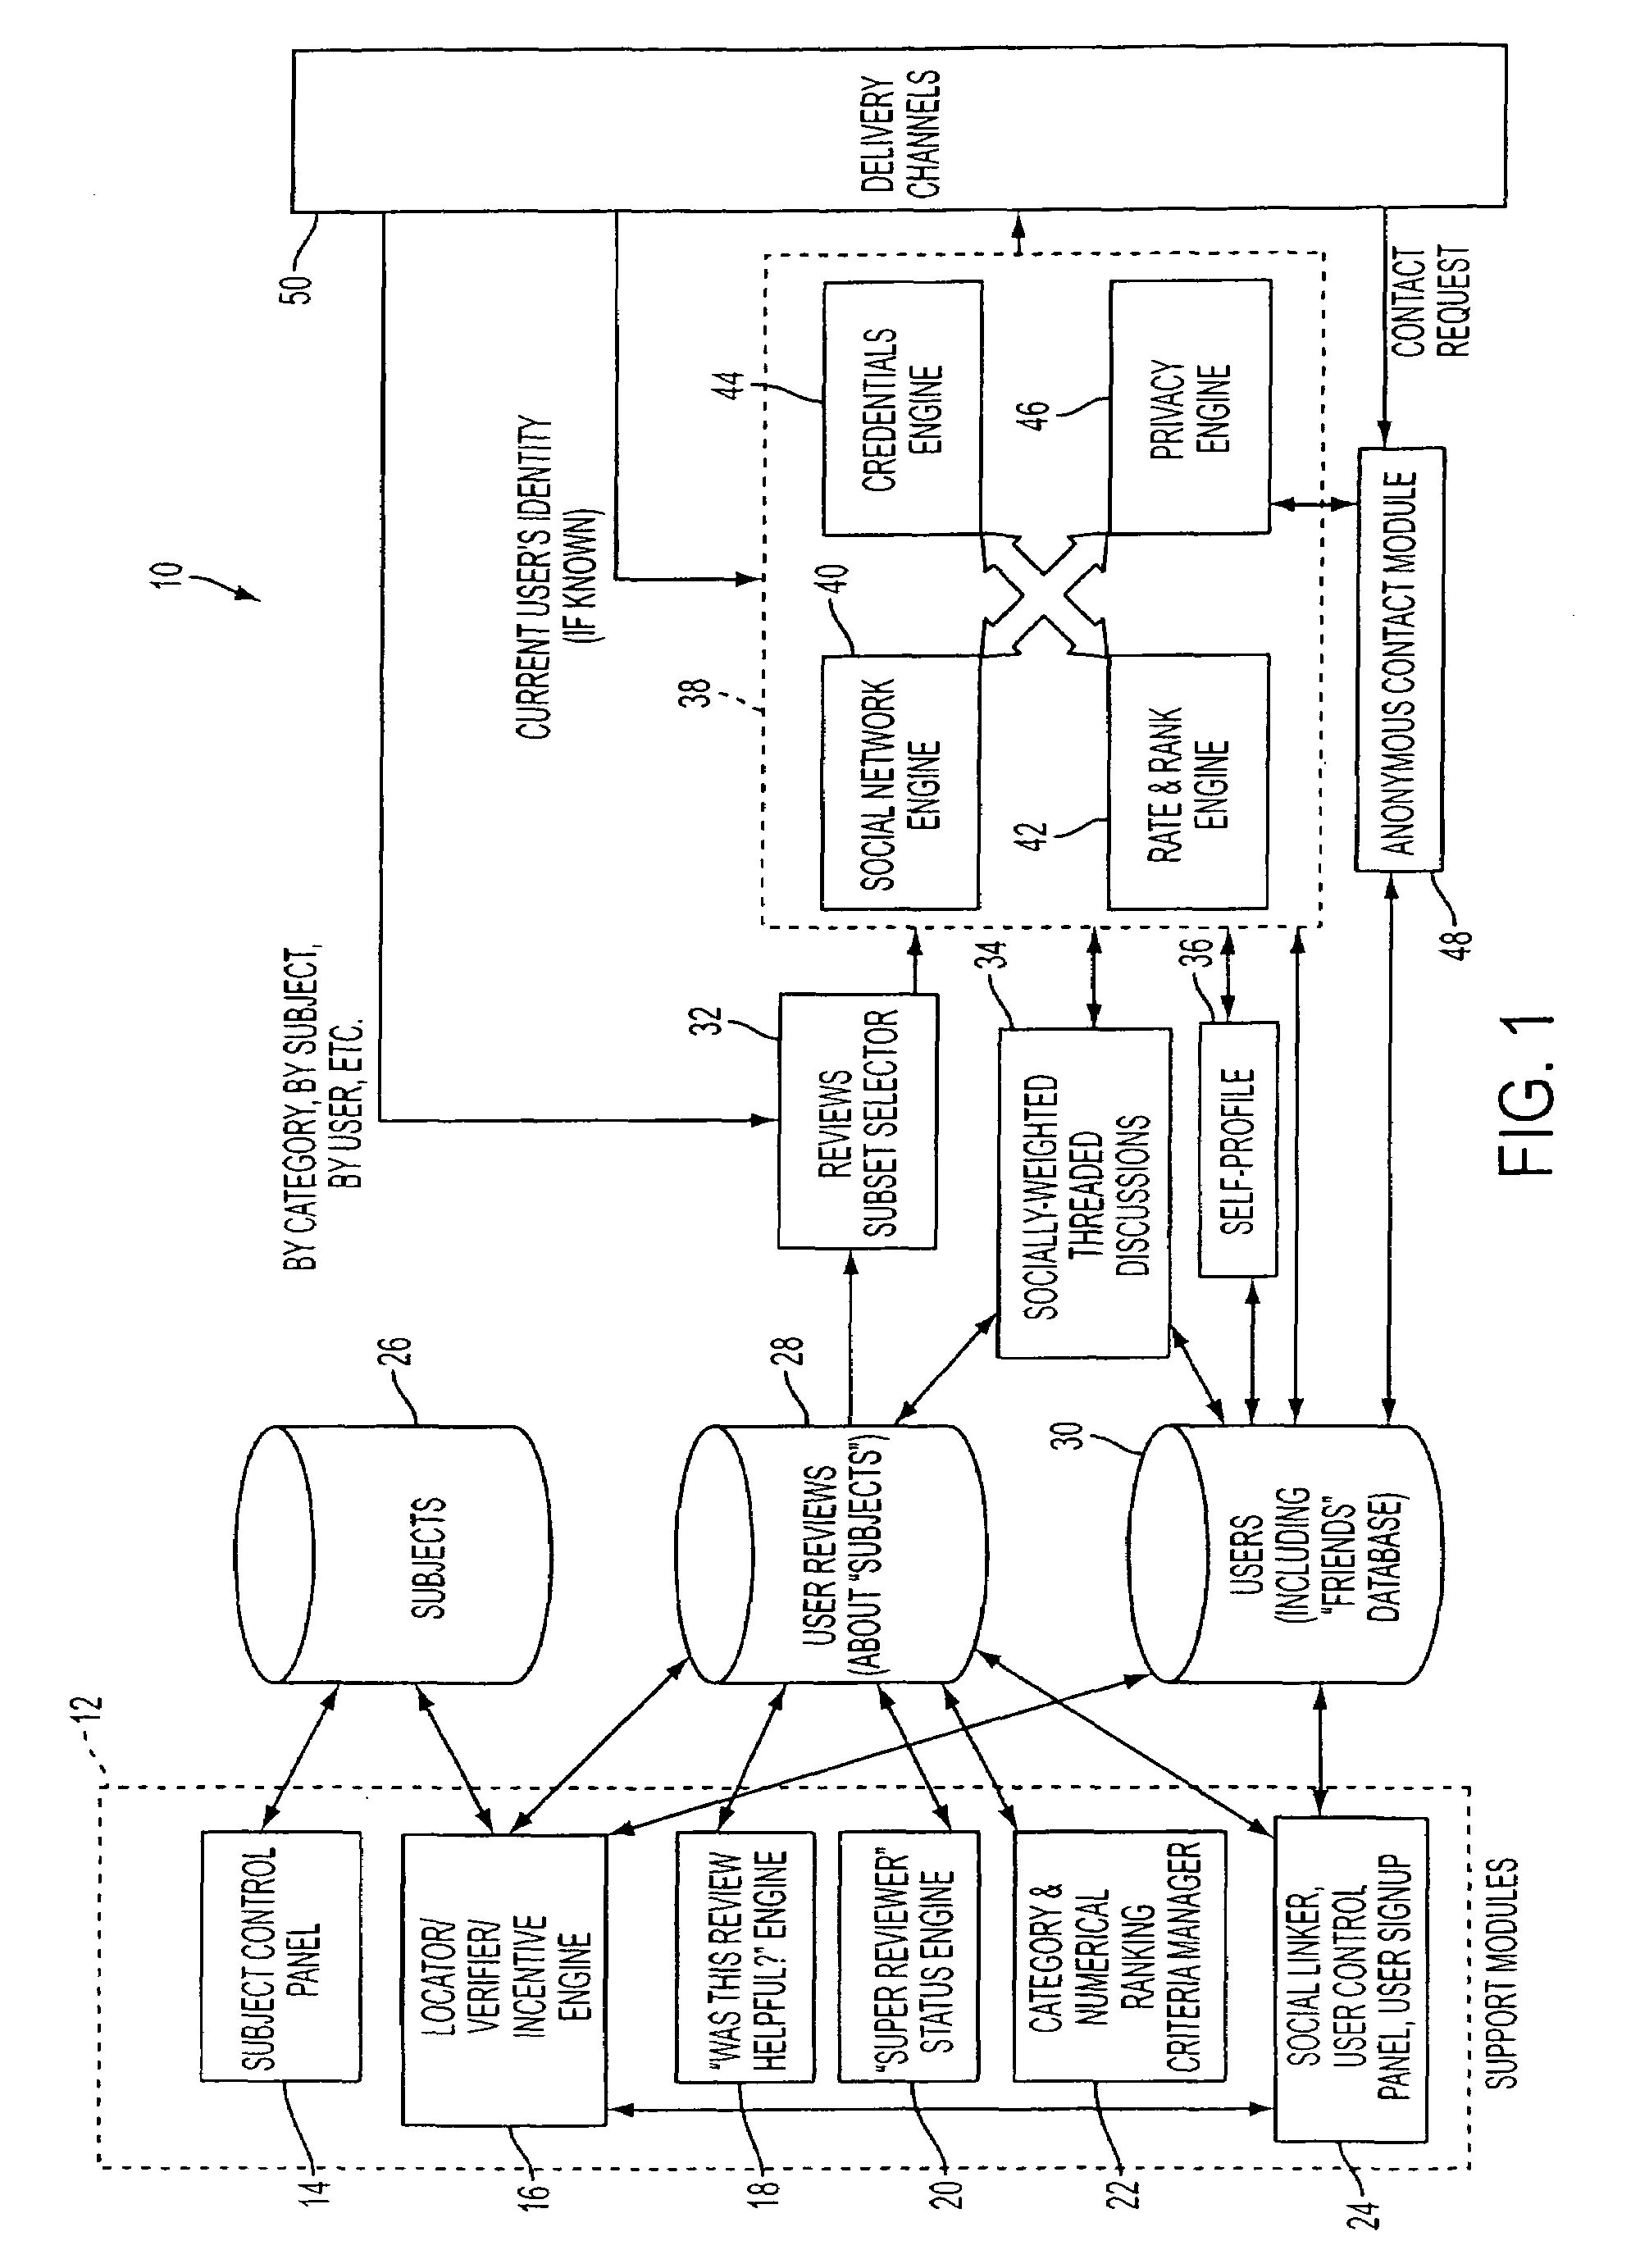 Vendor-driven, social-network enabled review collection system and method